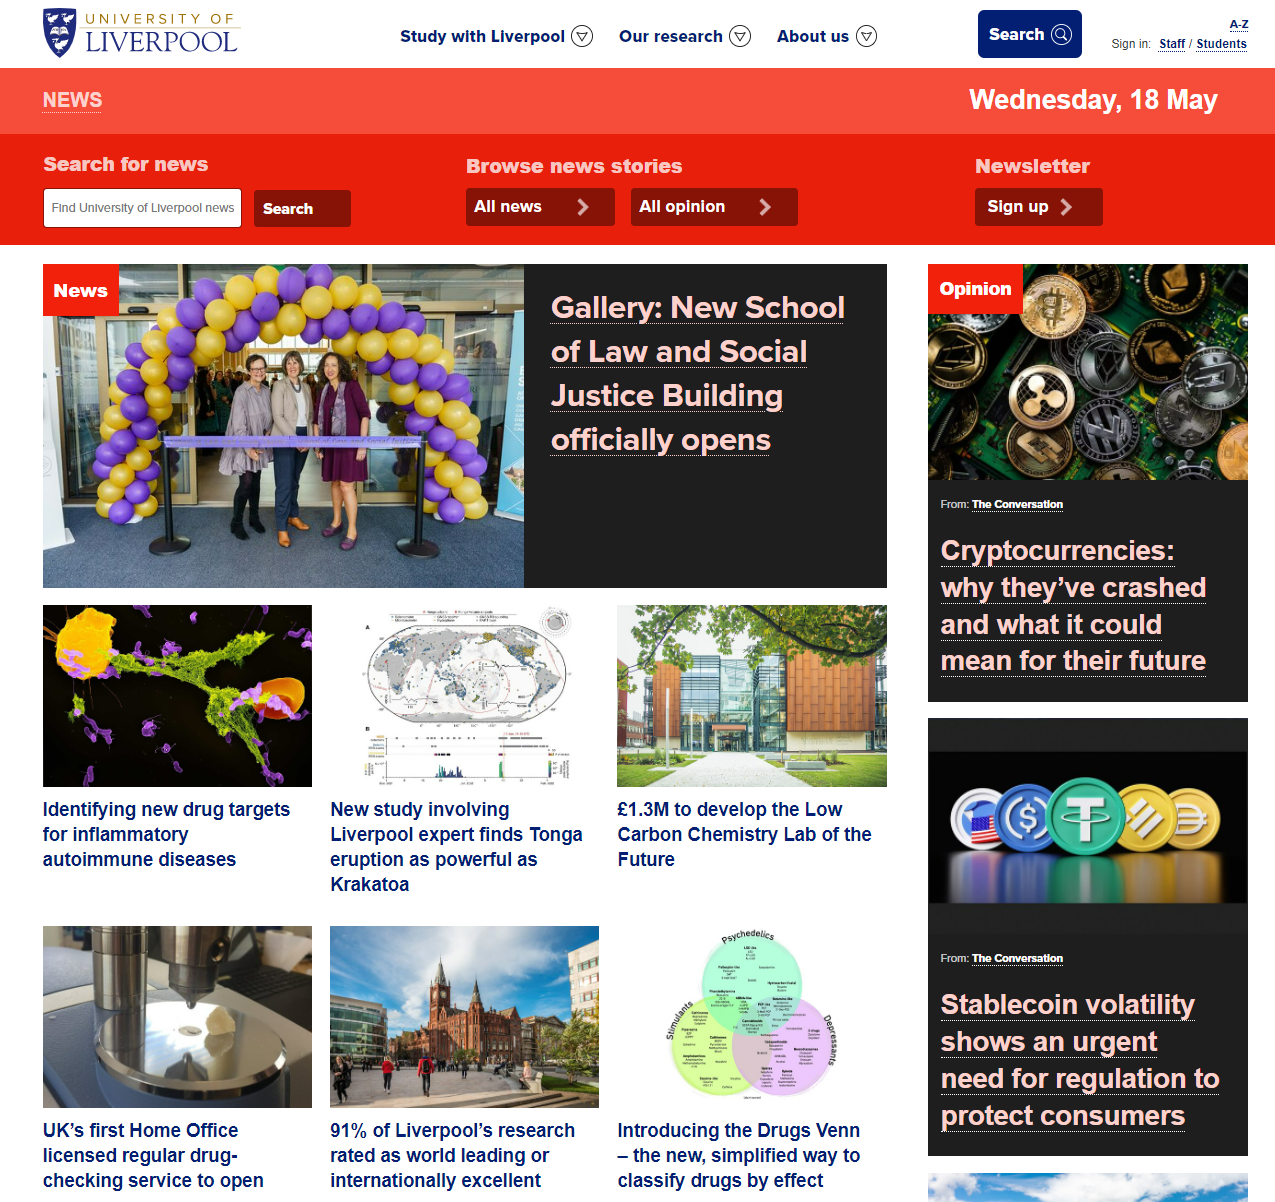 great university home page designs - university of liverpool.